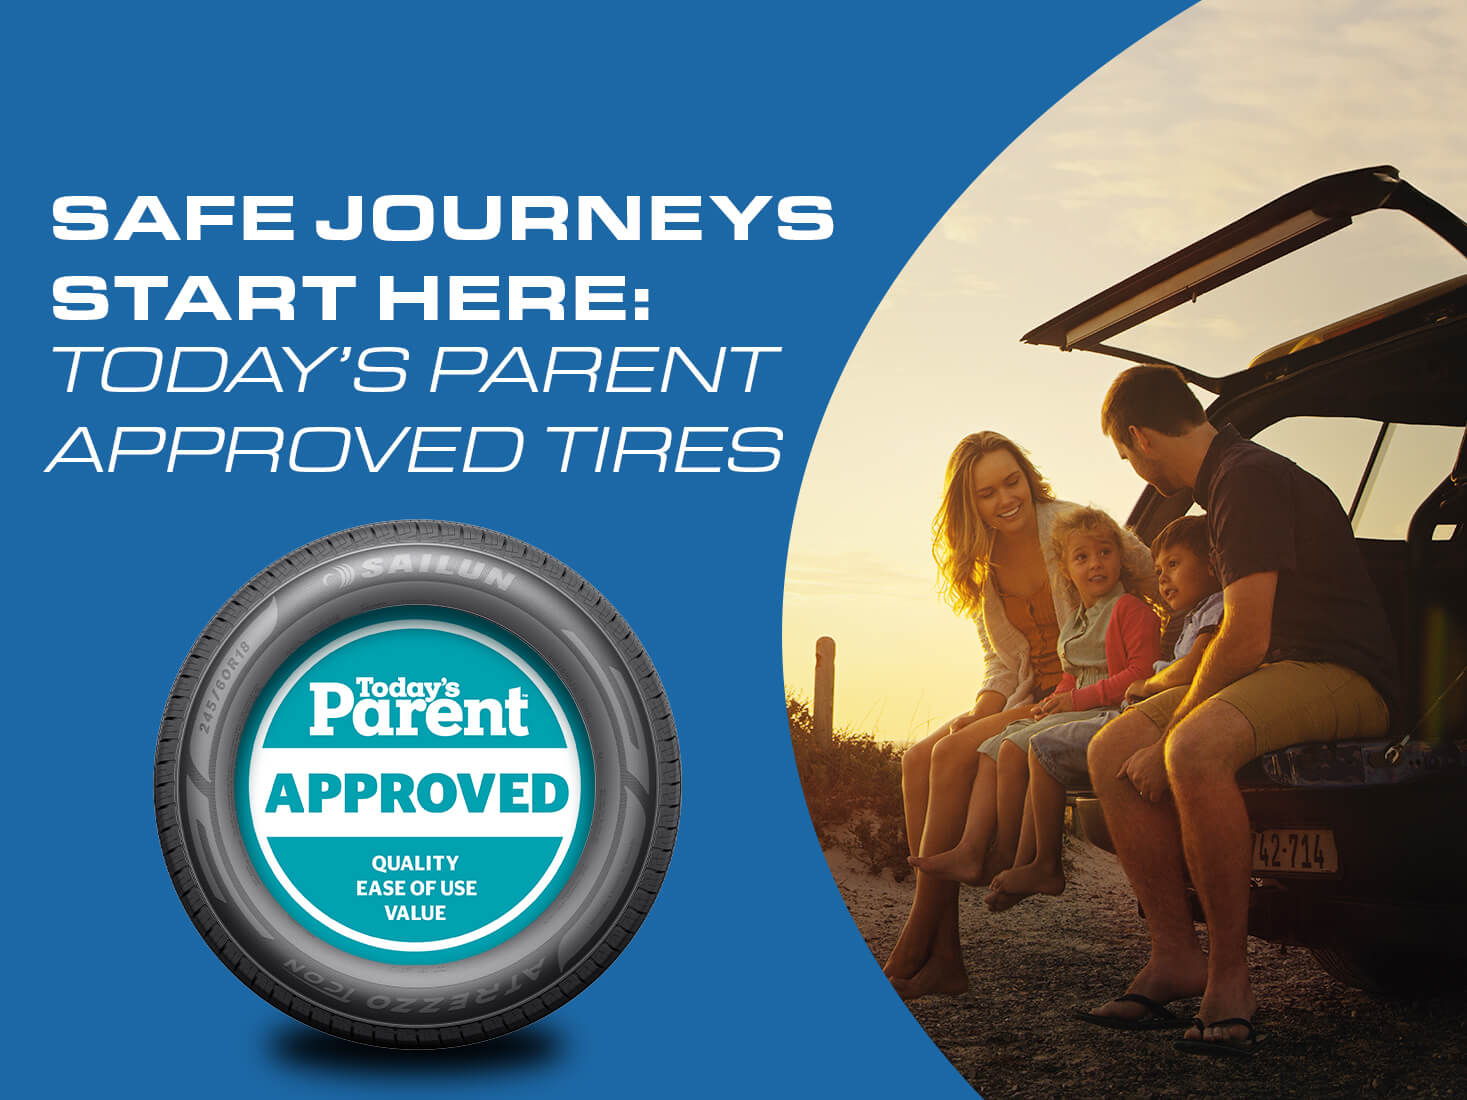 SAFE JOURNEY'S START HERE: TODAY'S PARENT APPROVED TIRES